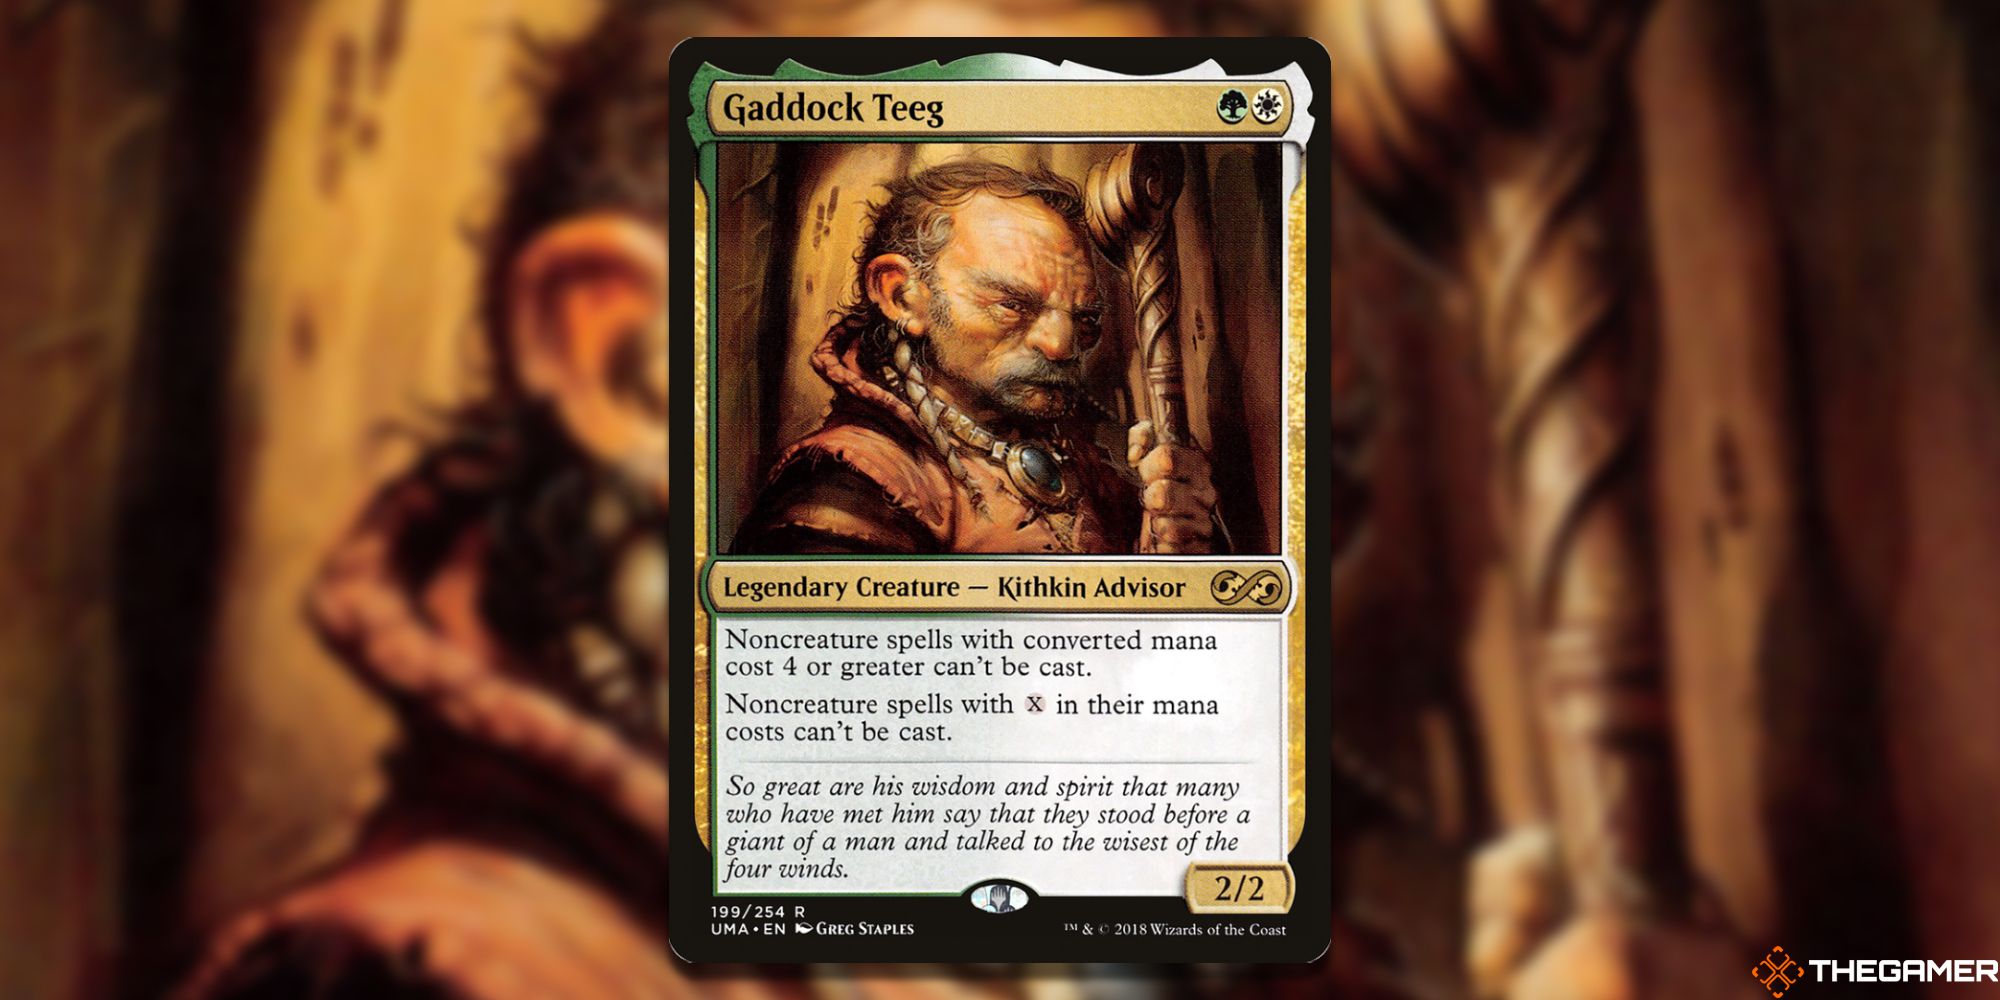  Image of the Gaddock Teeg card in Magic: The Gathering, with art by Greg Staples